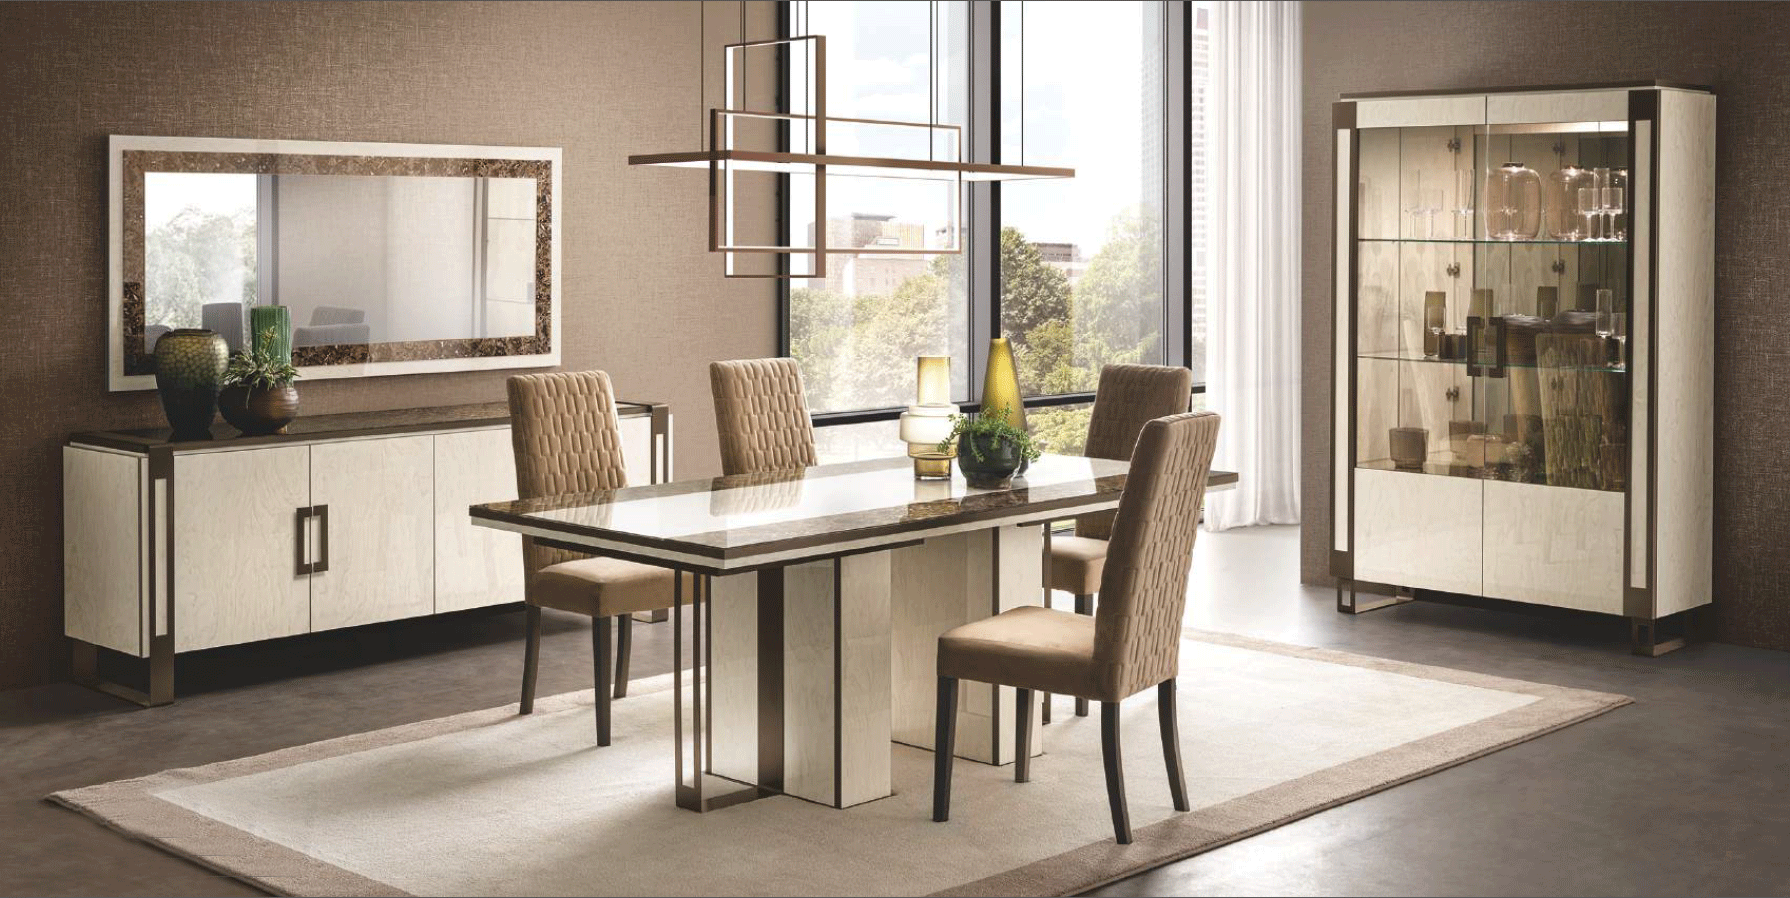 Brands Stella Living 2023 Poesia Dining room Additional items